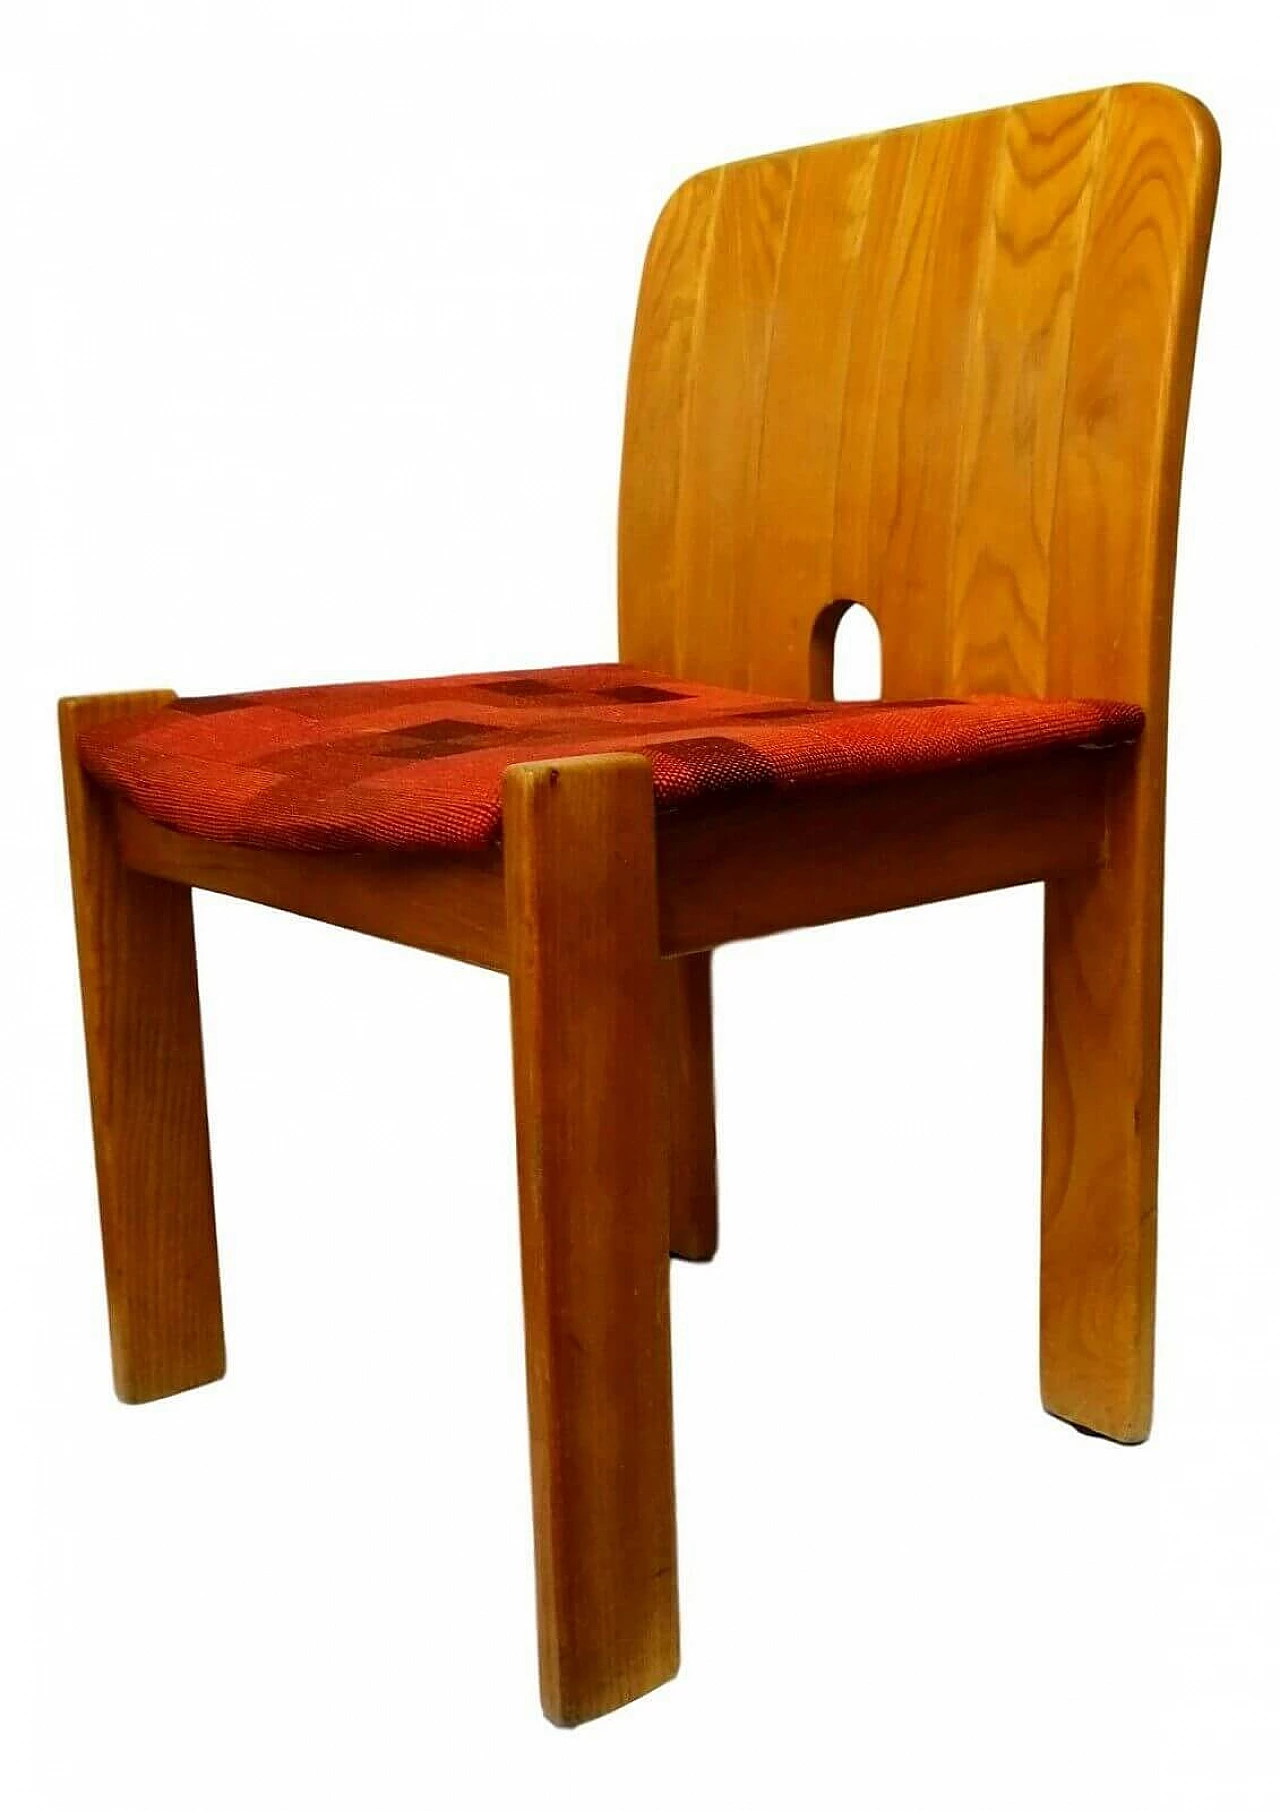 4 Design wooden chairs, 70s 1164513